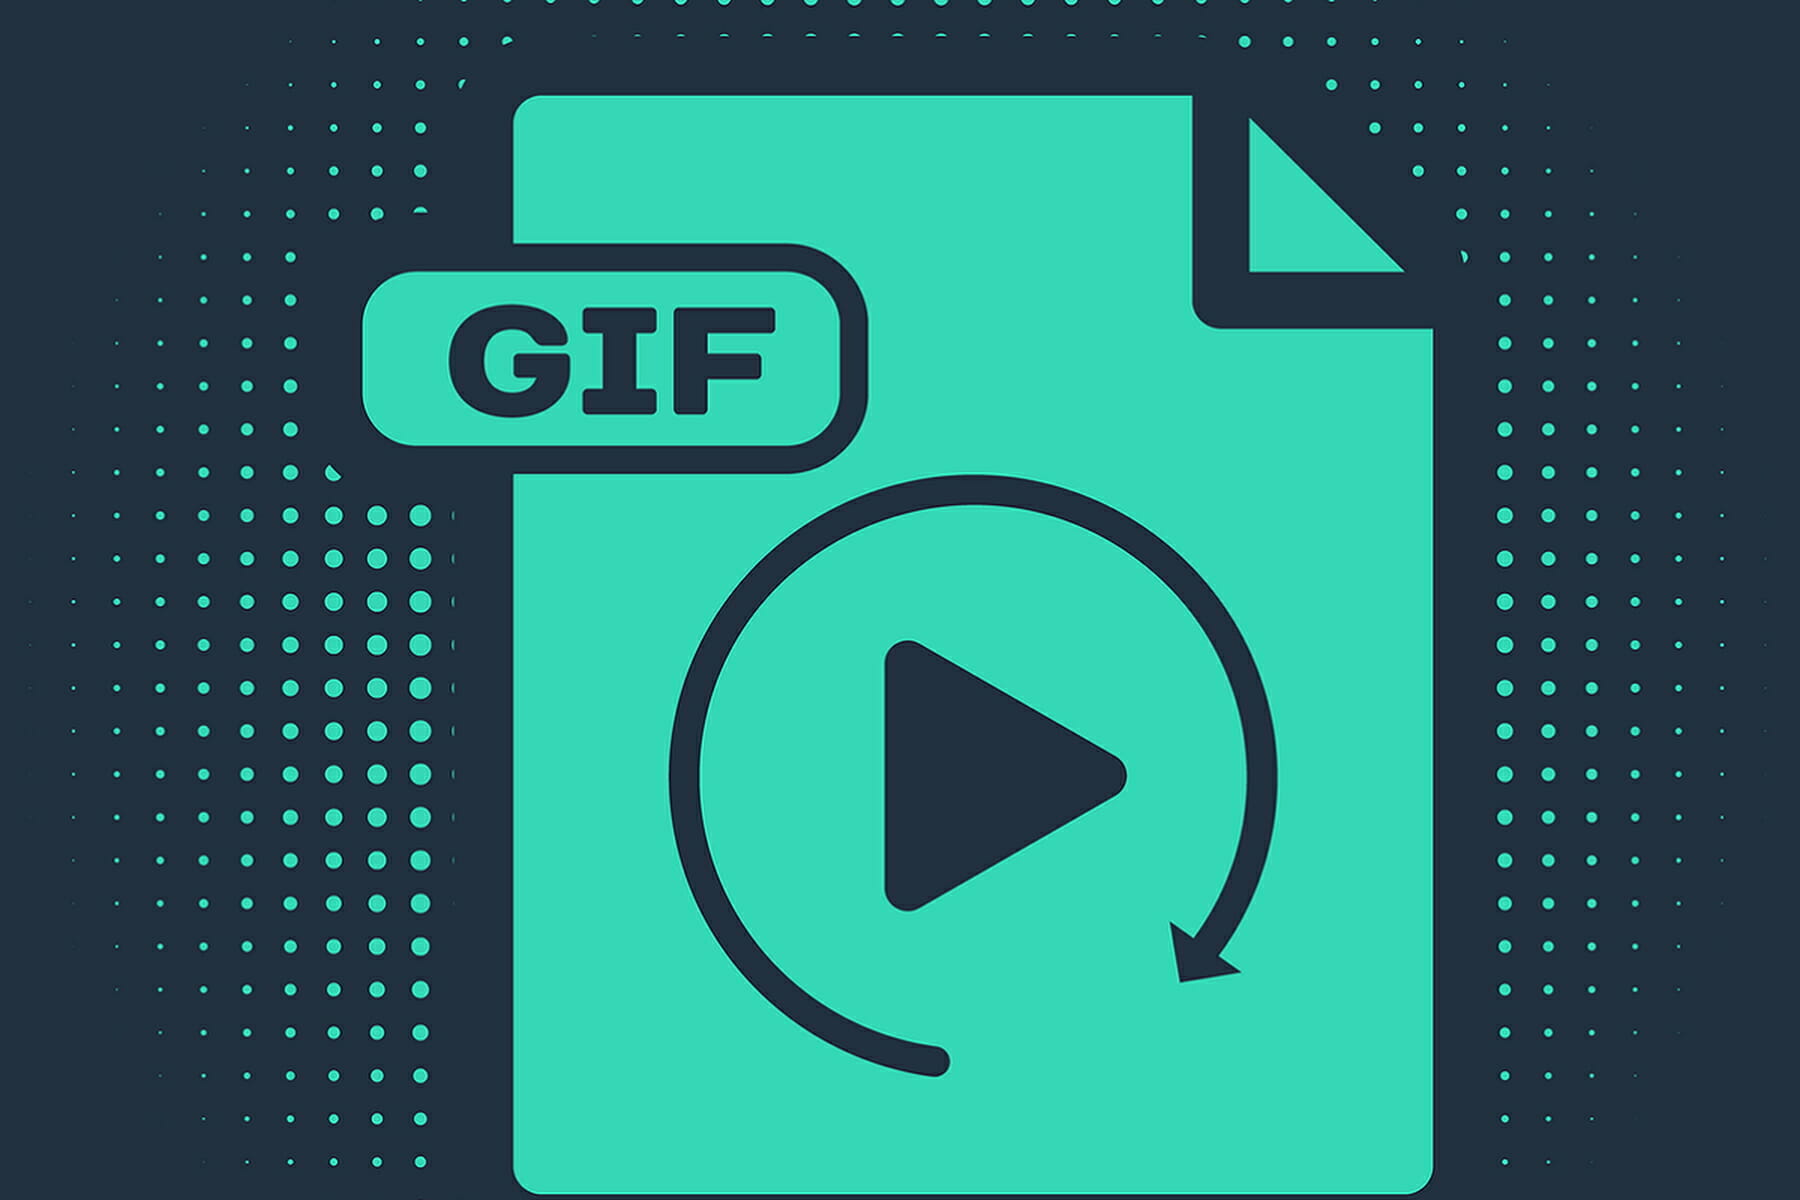 How can I compress gifs without losing quality